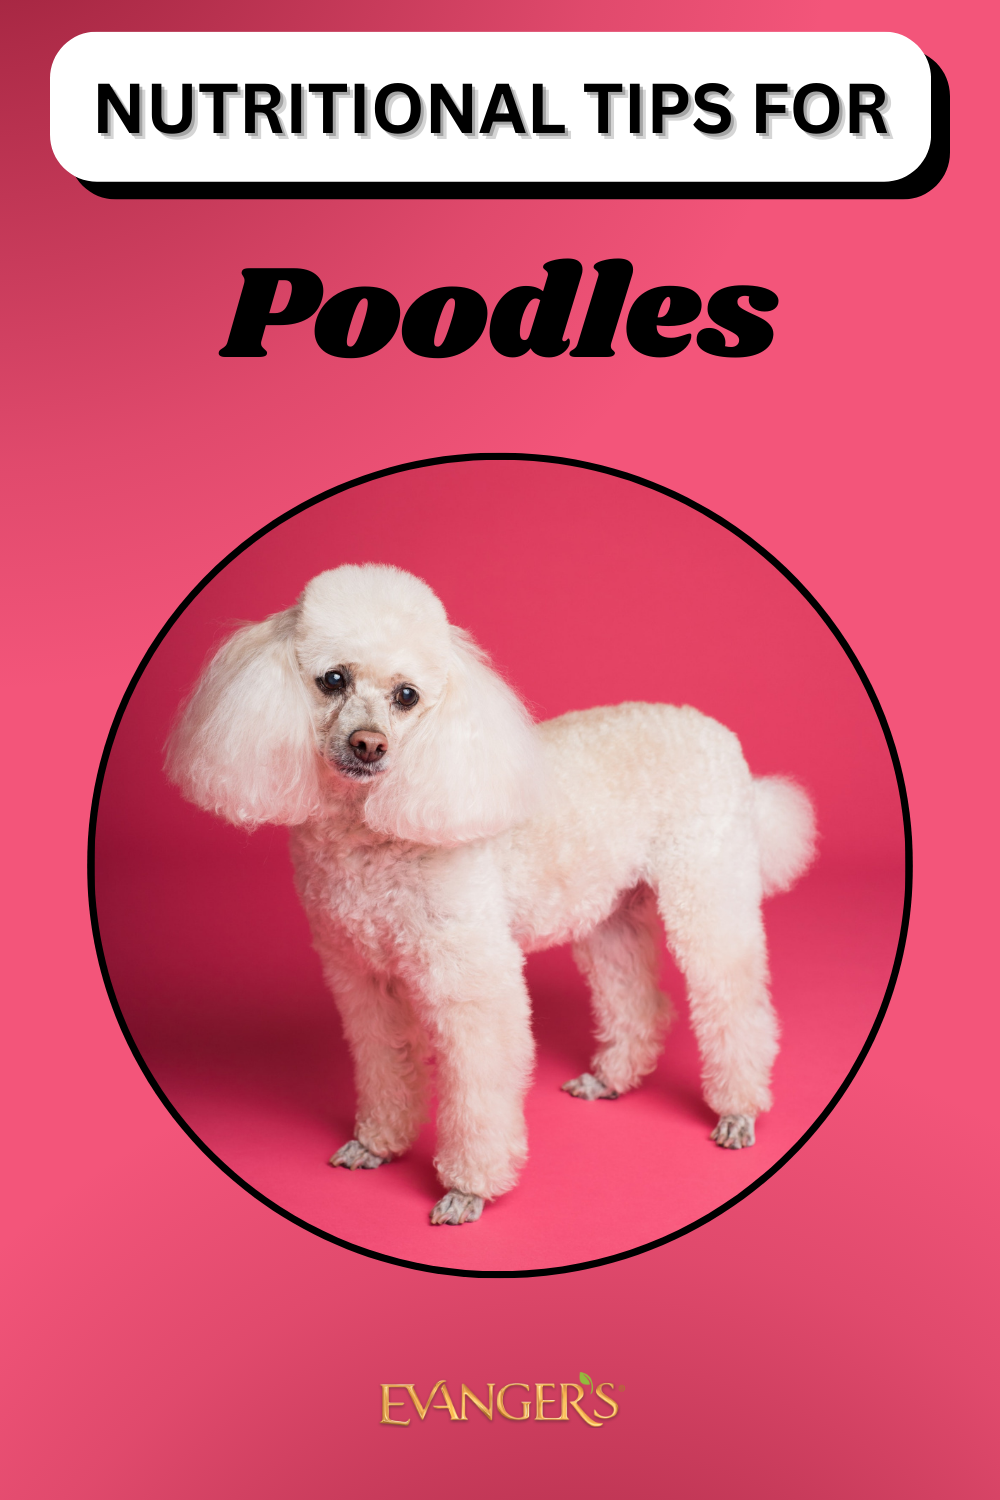 Nutritional Tips for Poodles